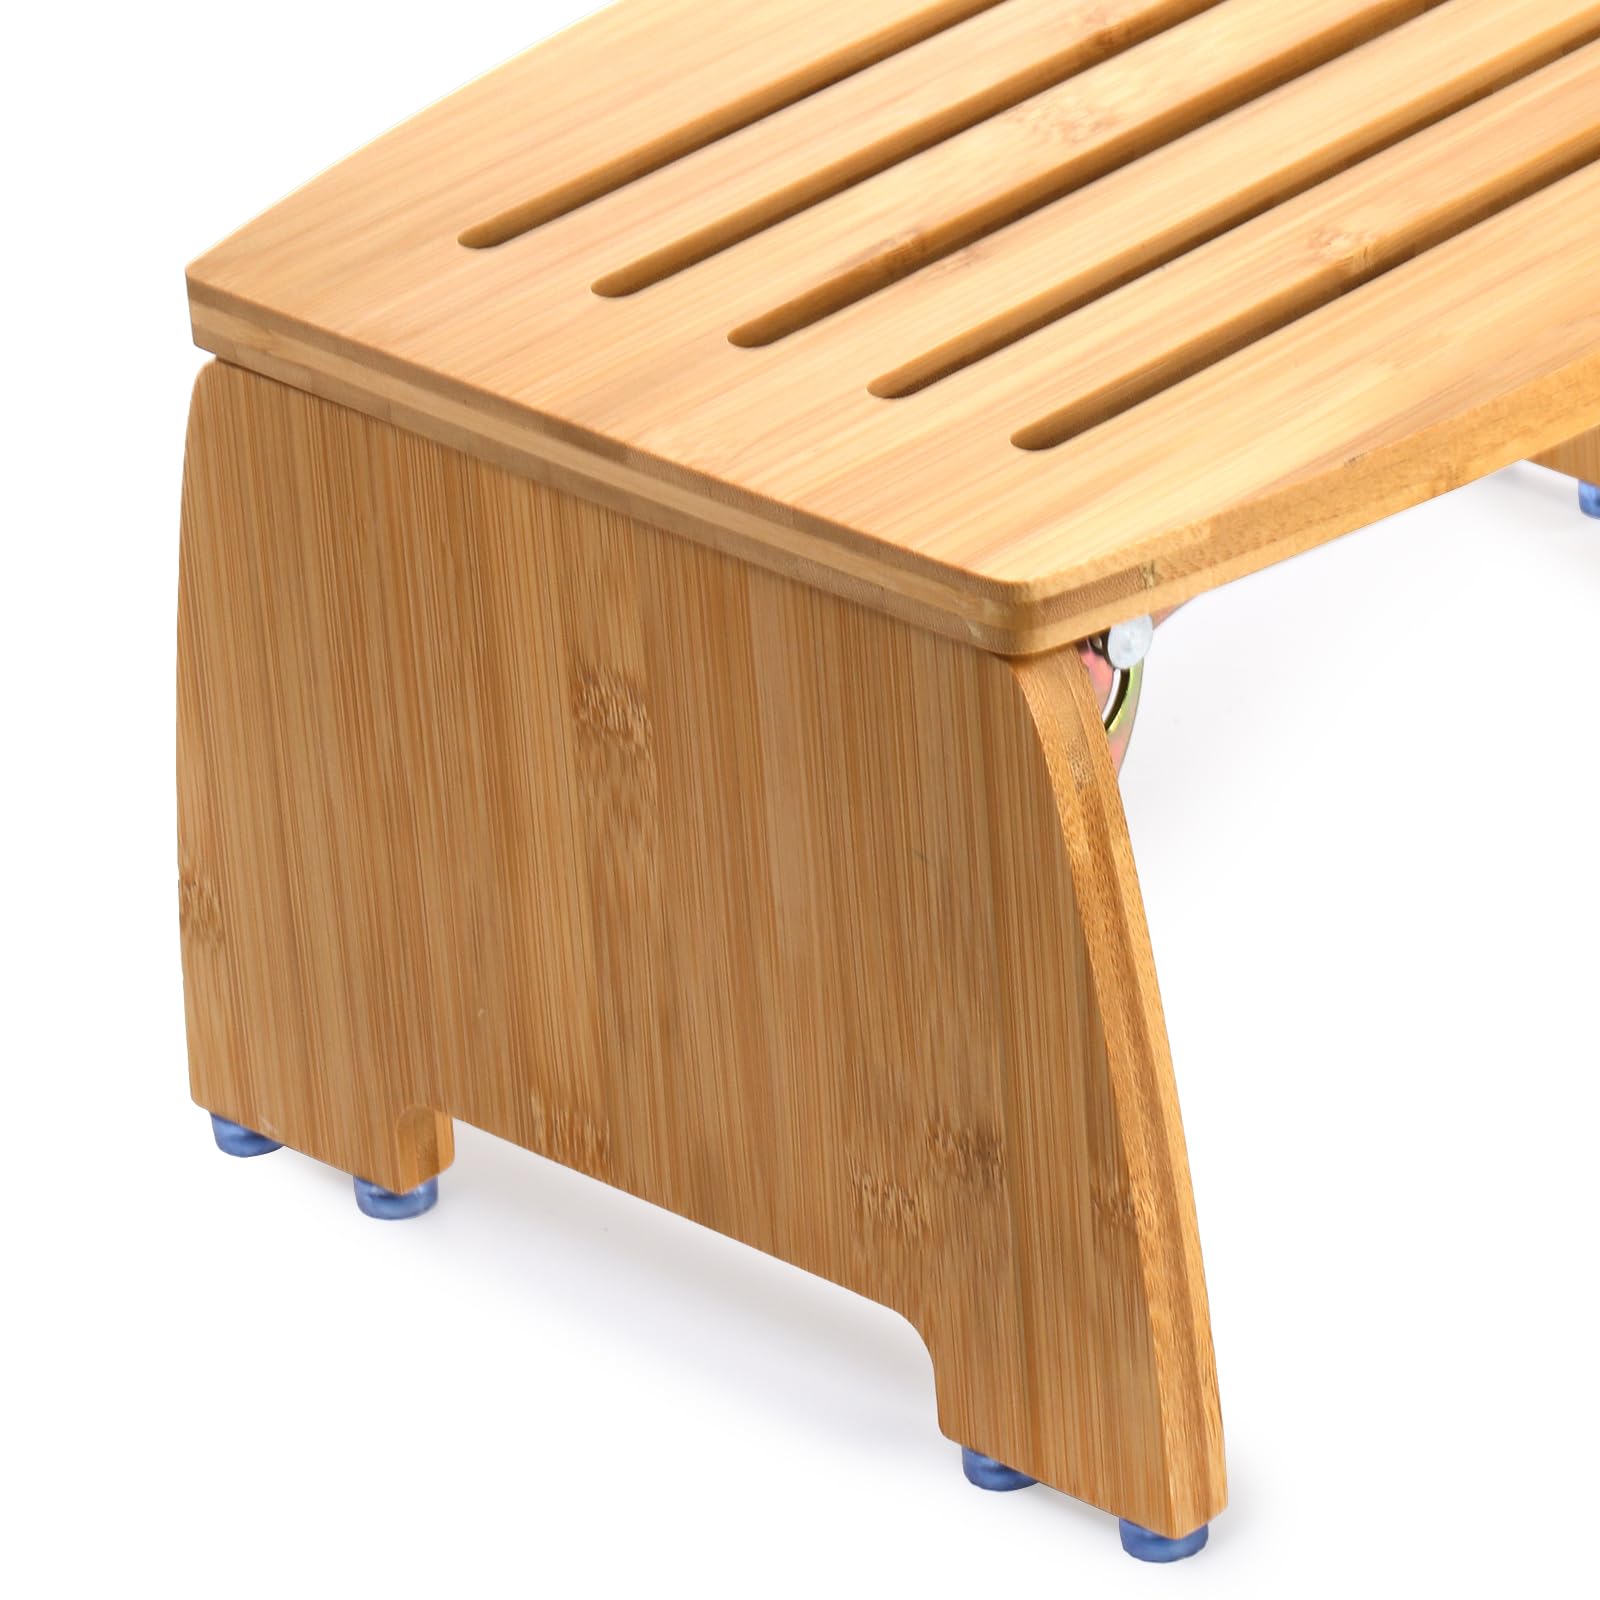 Lyellfe Bamboo Folding Step Stool, Non-Slip Leg Shaving Foot Rest Chair, Foldable One Step Stool for Home, Adults, Support up to 300lbs, Fully Assembled